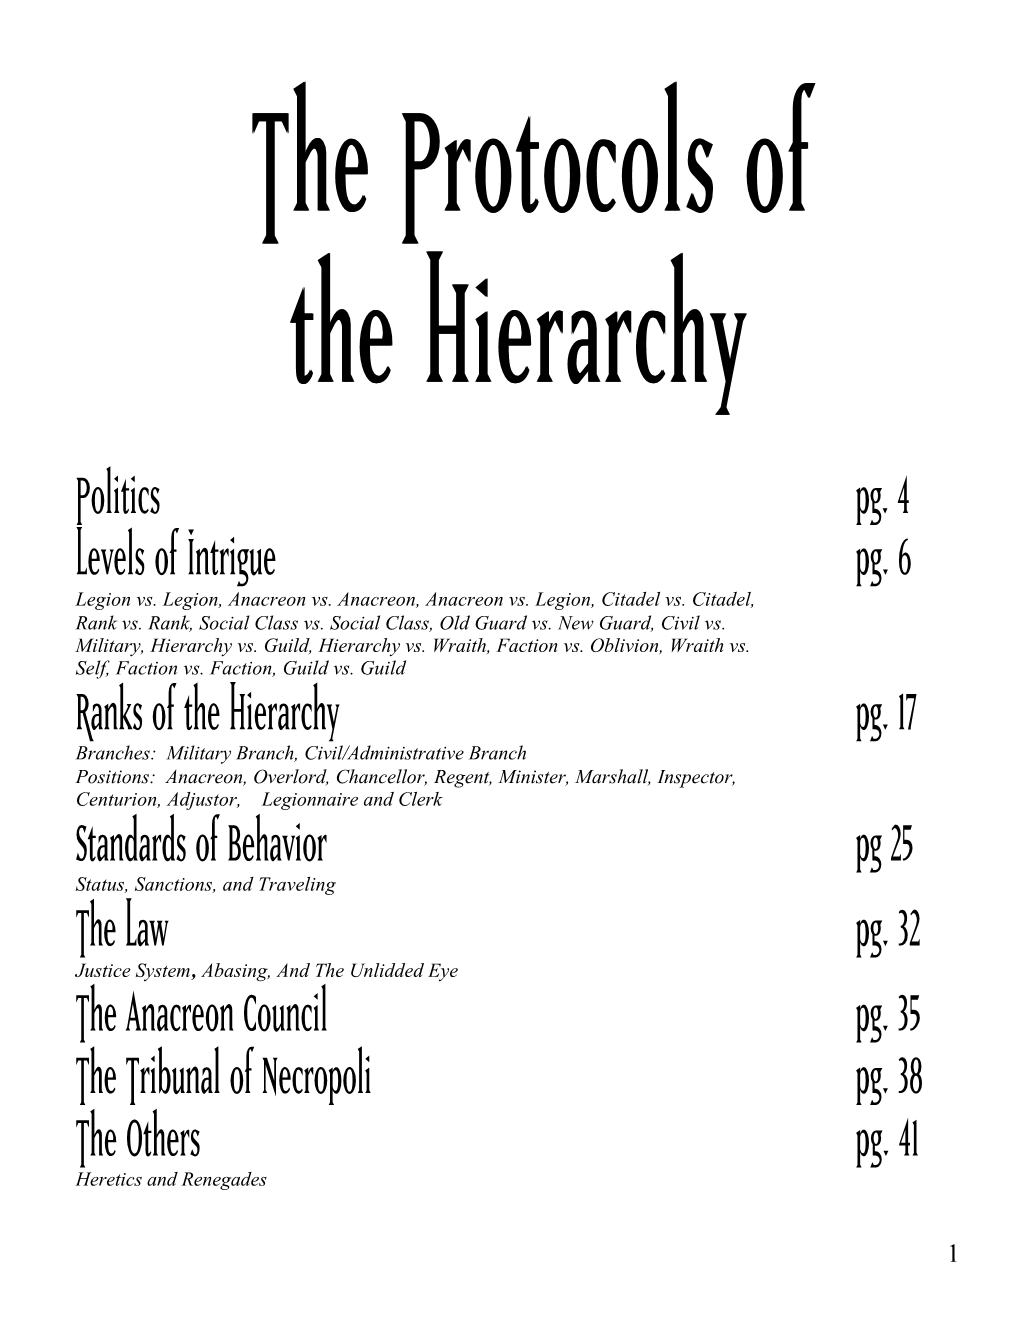 The Protocols of the Hierarchy